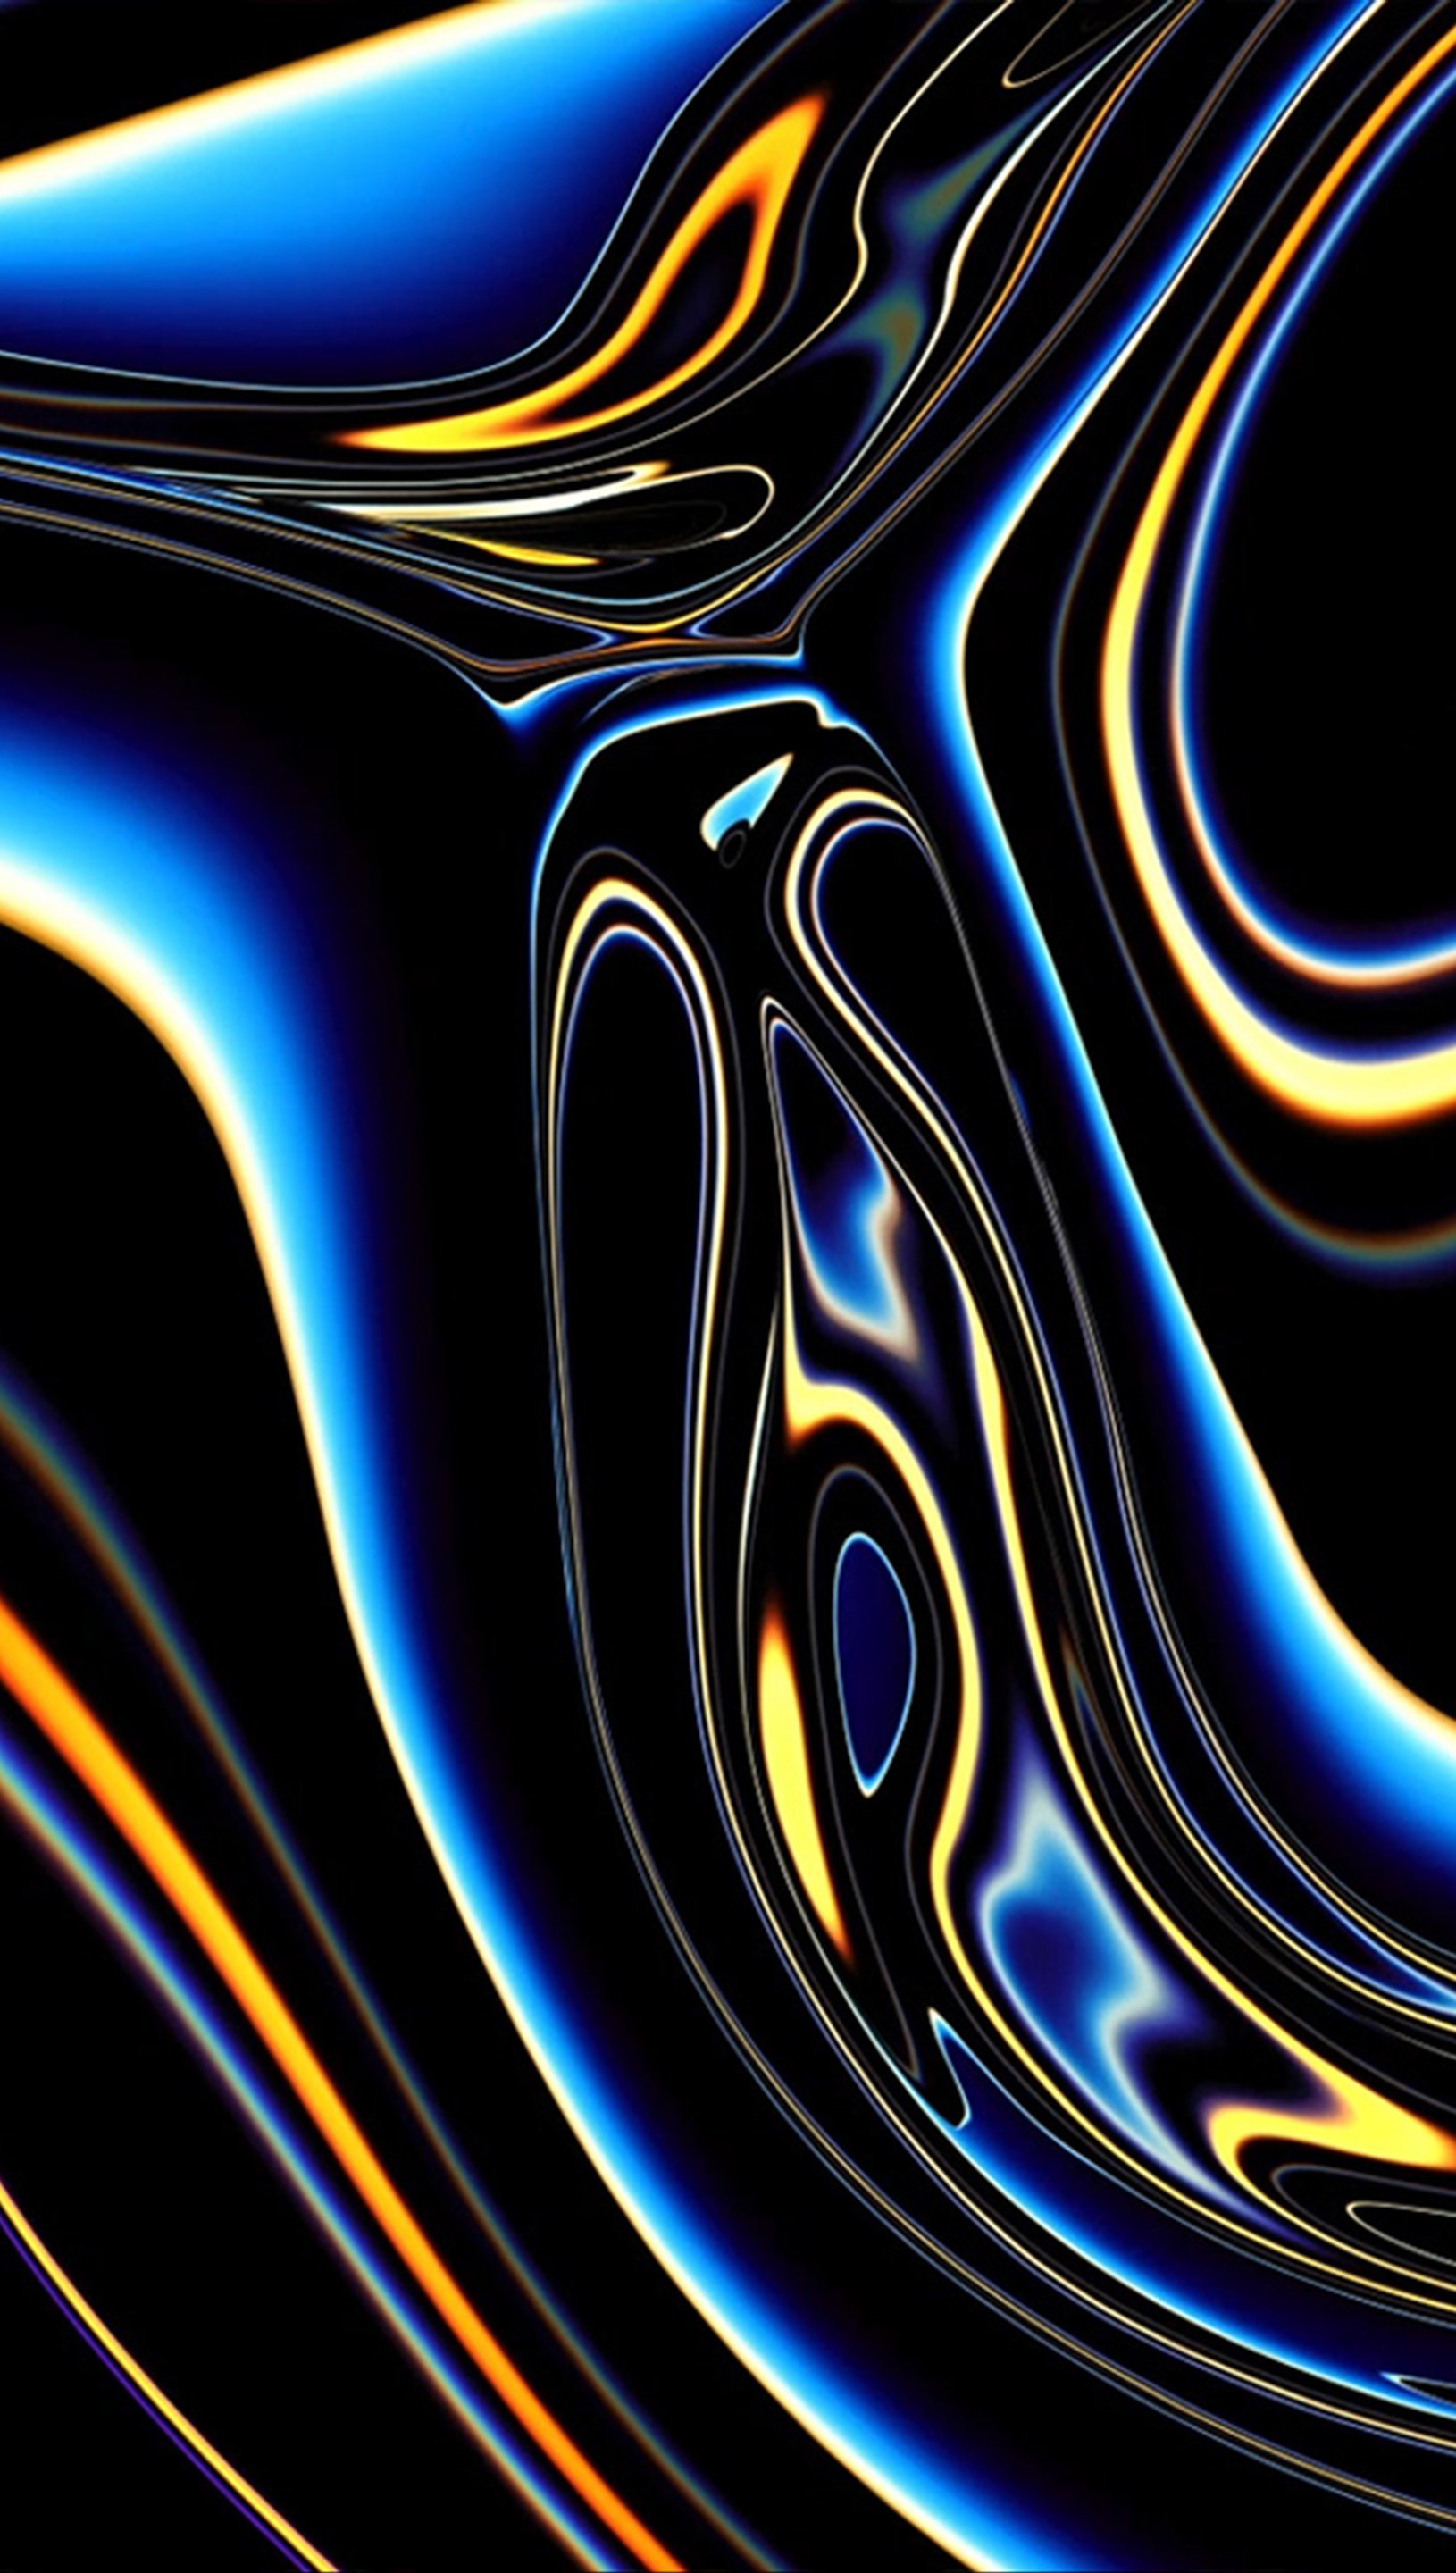 Wallpaper Apple Pro Display XDR Abstract Vertical